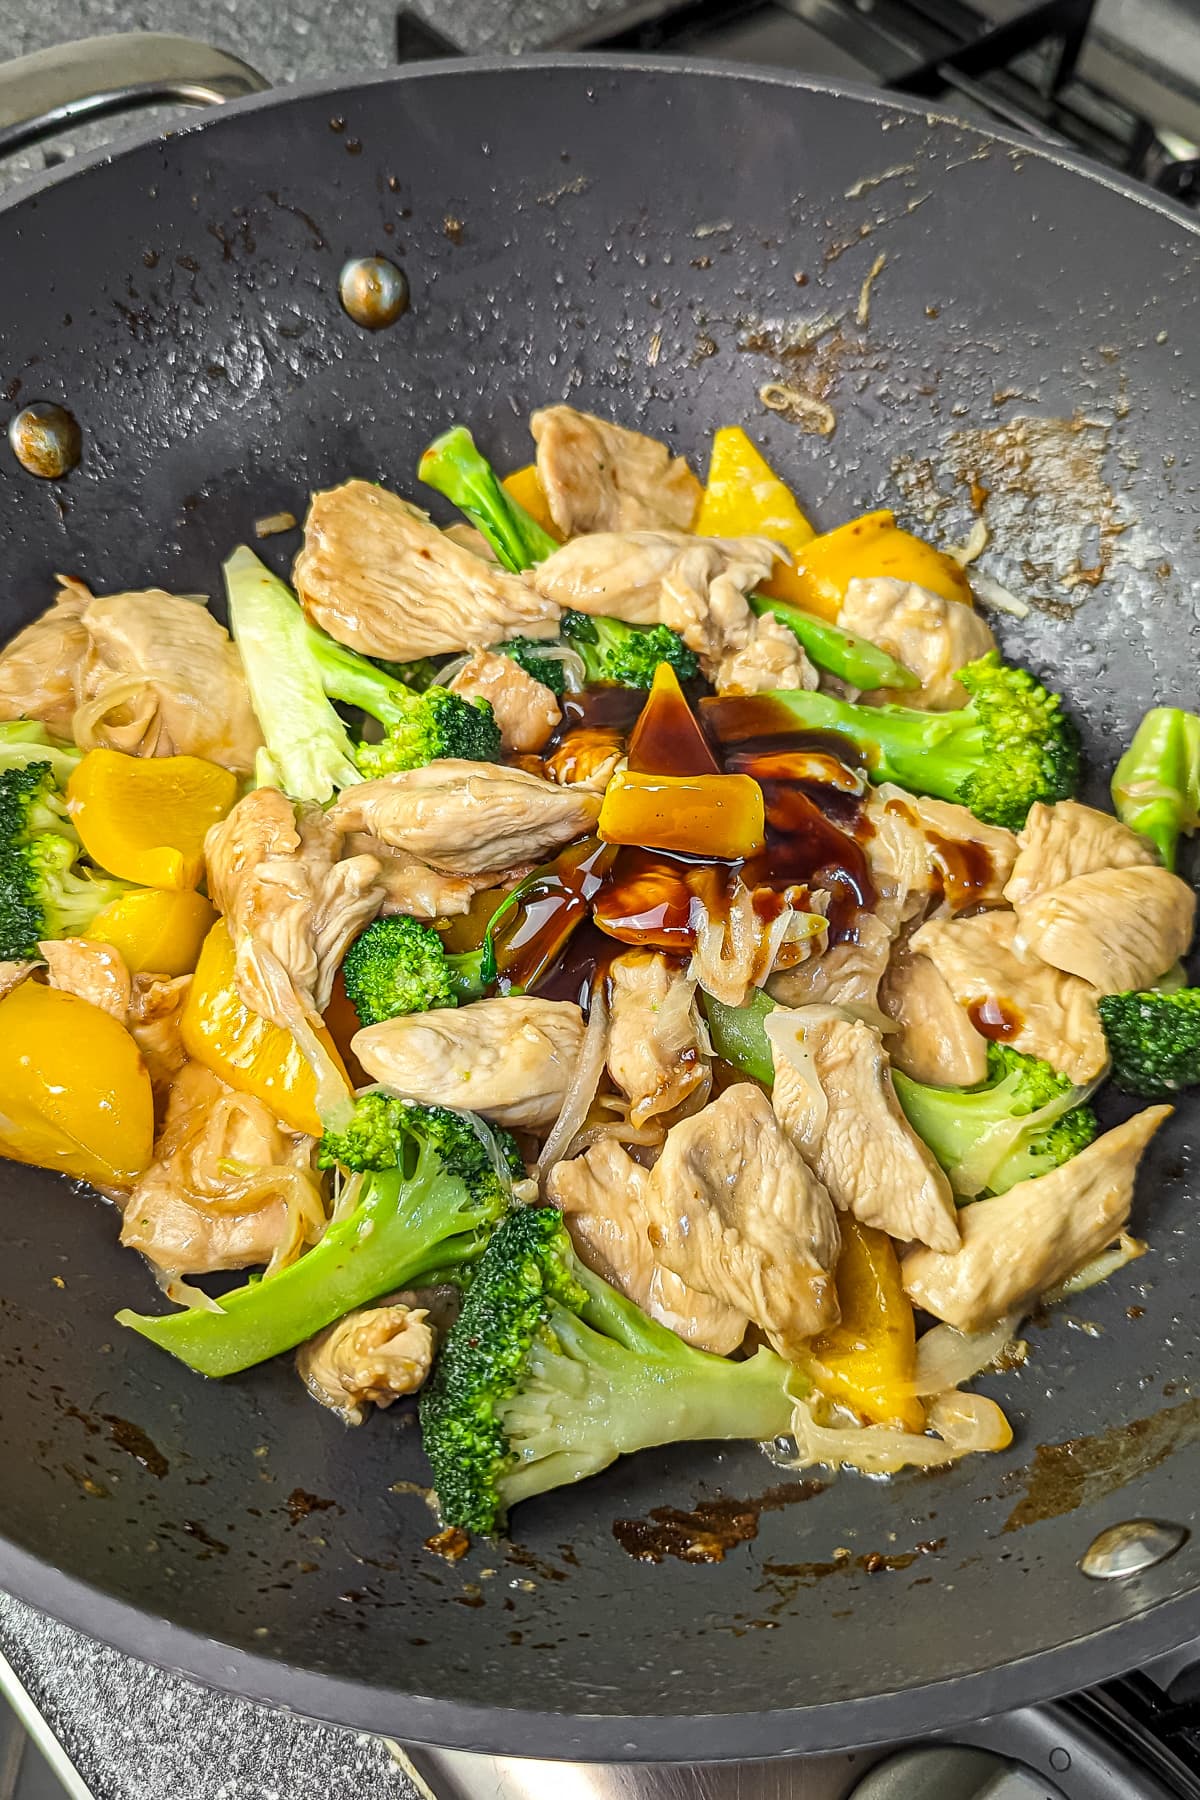 Teriyaki sauce being poured over the chicken and vegetable stir-fry in the pan.